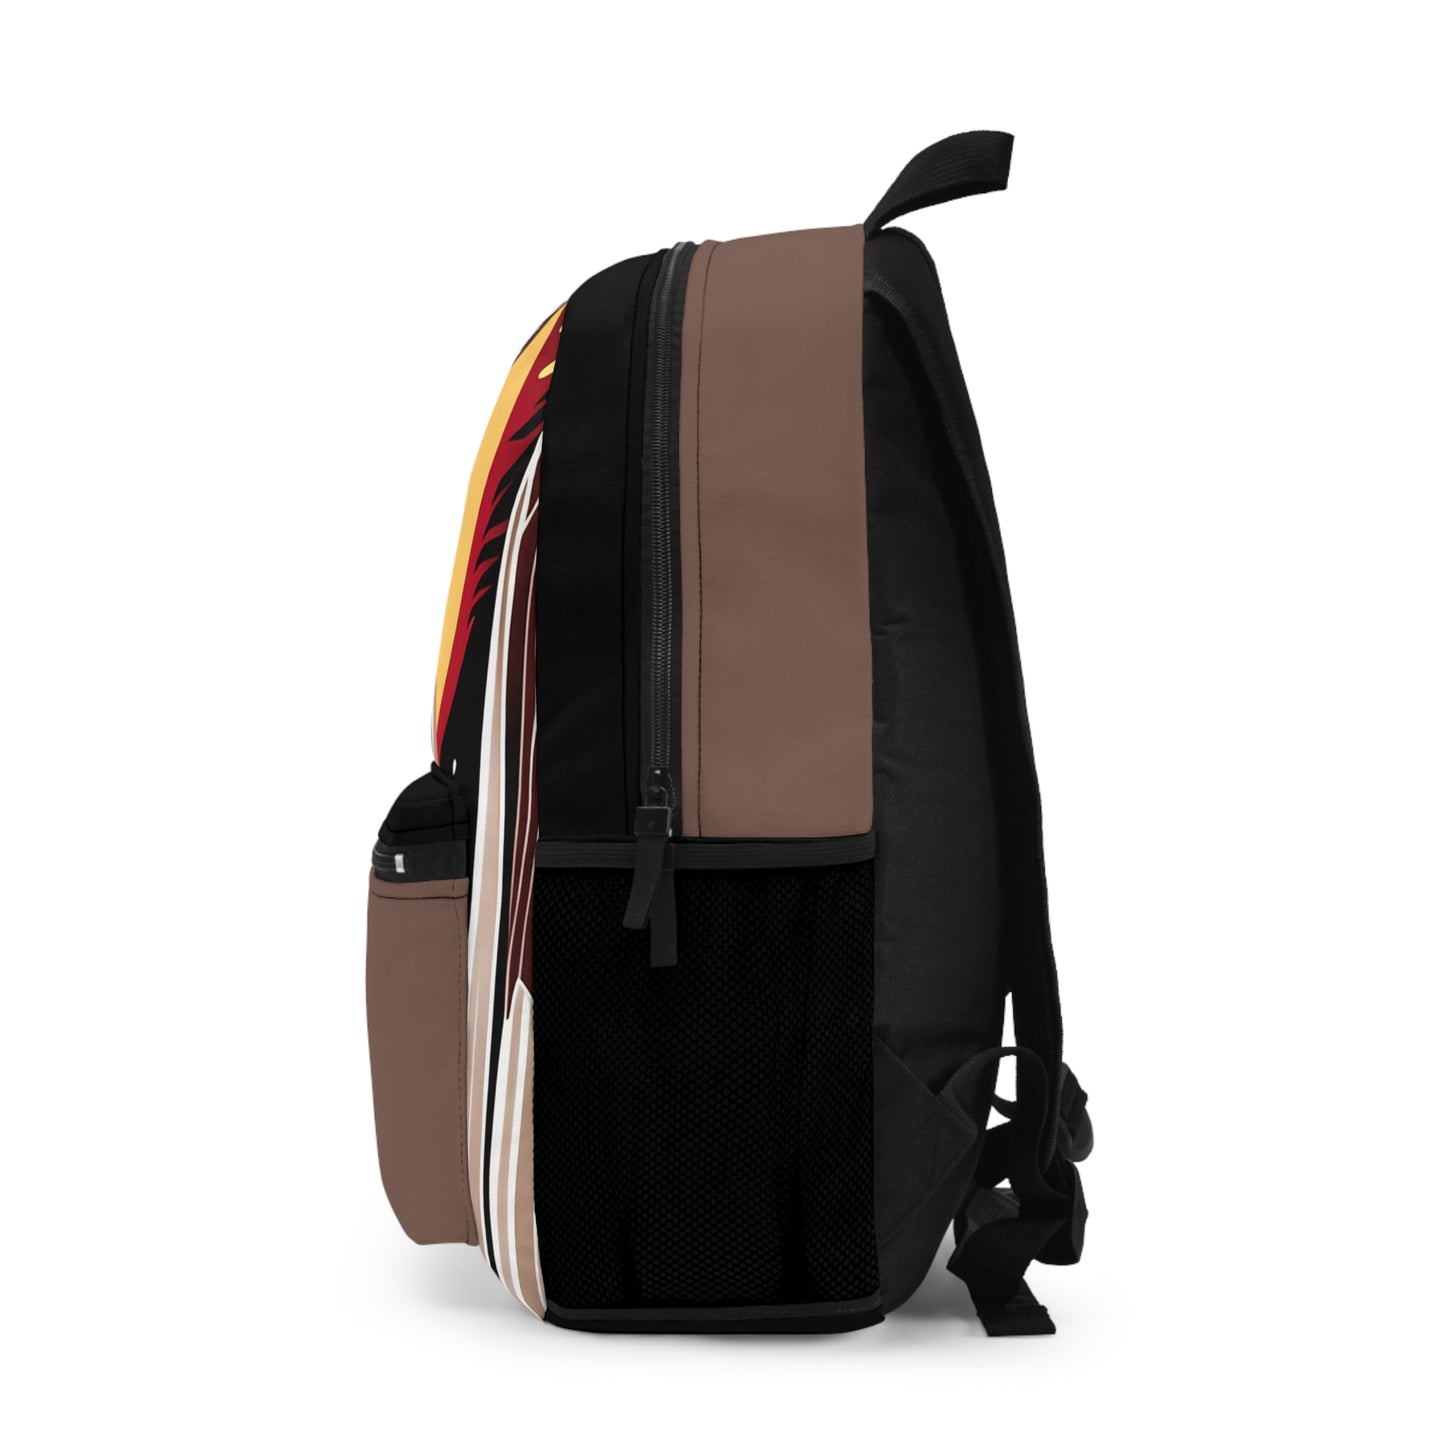 Sunset Coyote, Backpack with Computer Pocket and Padded Back